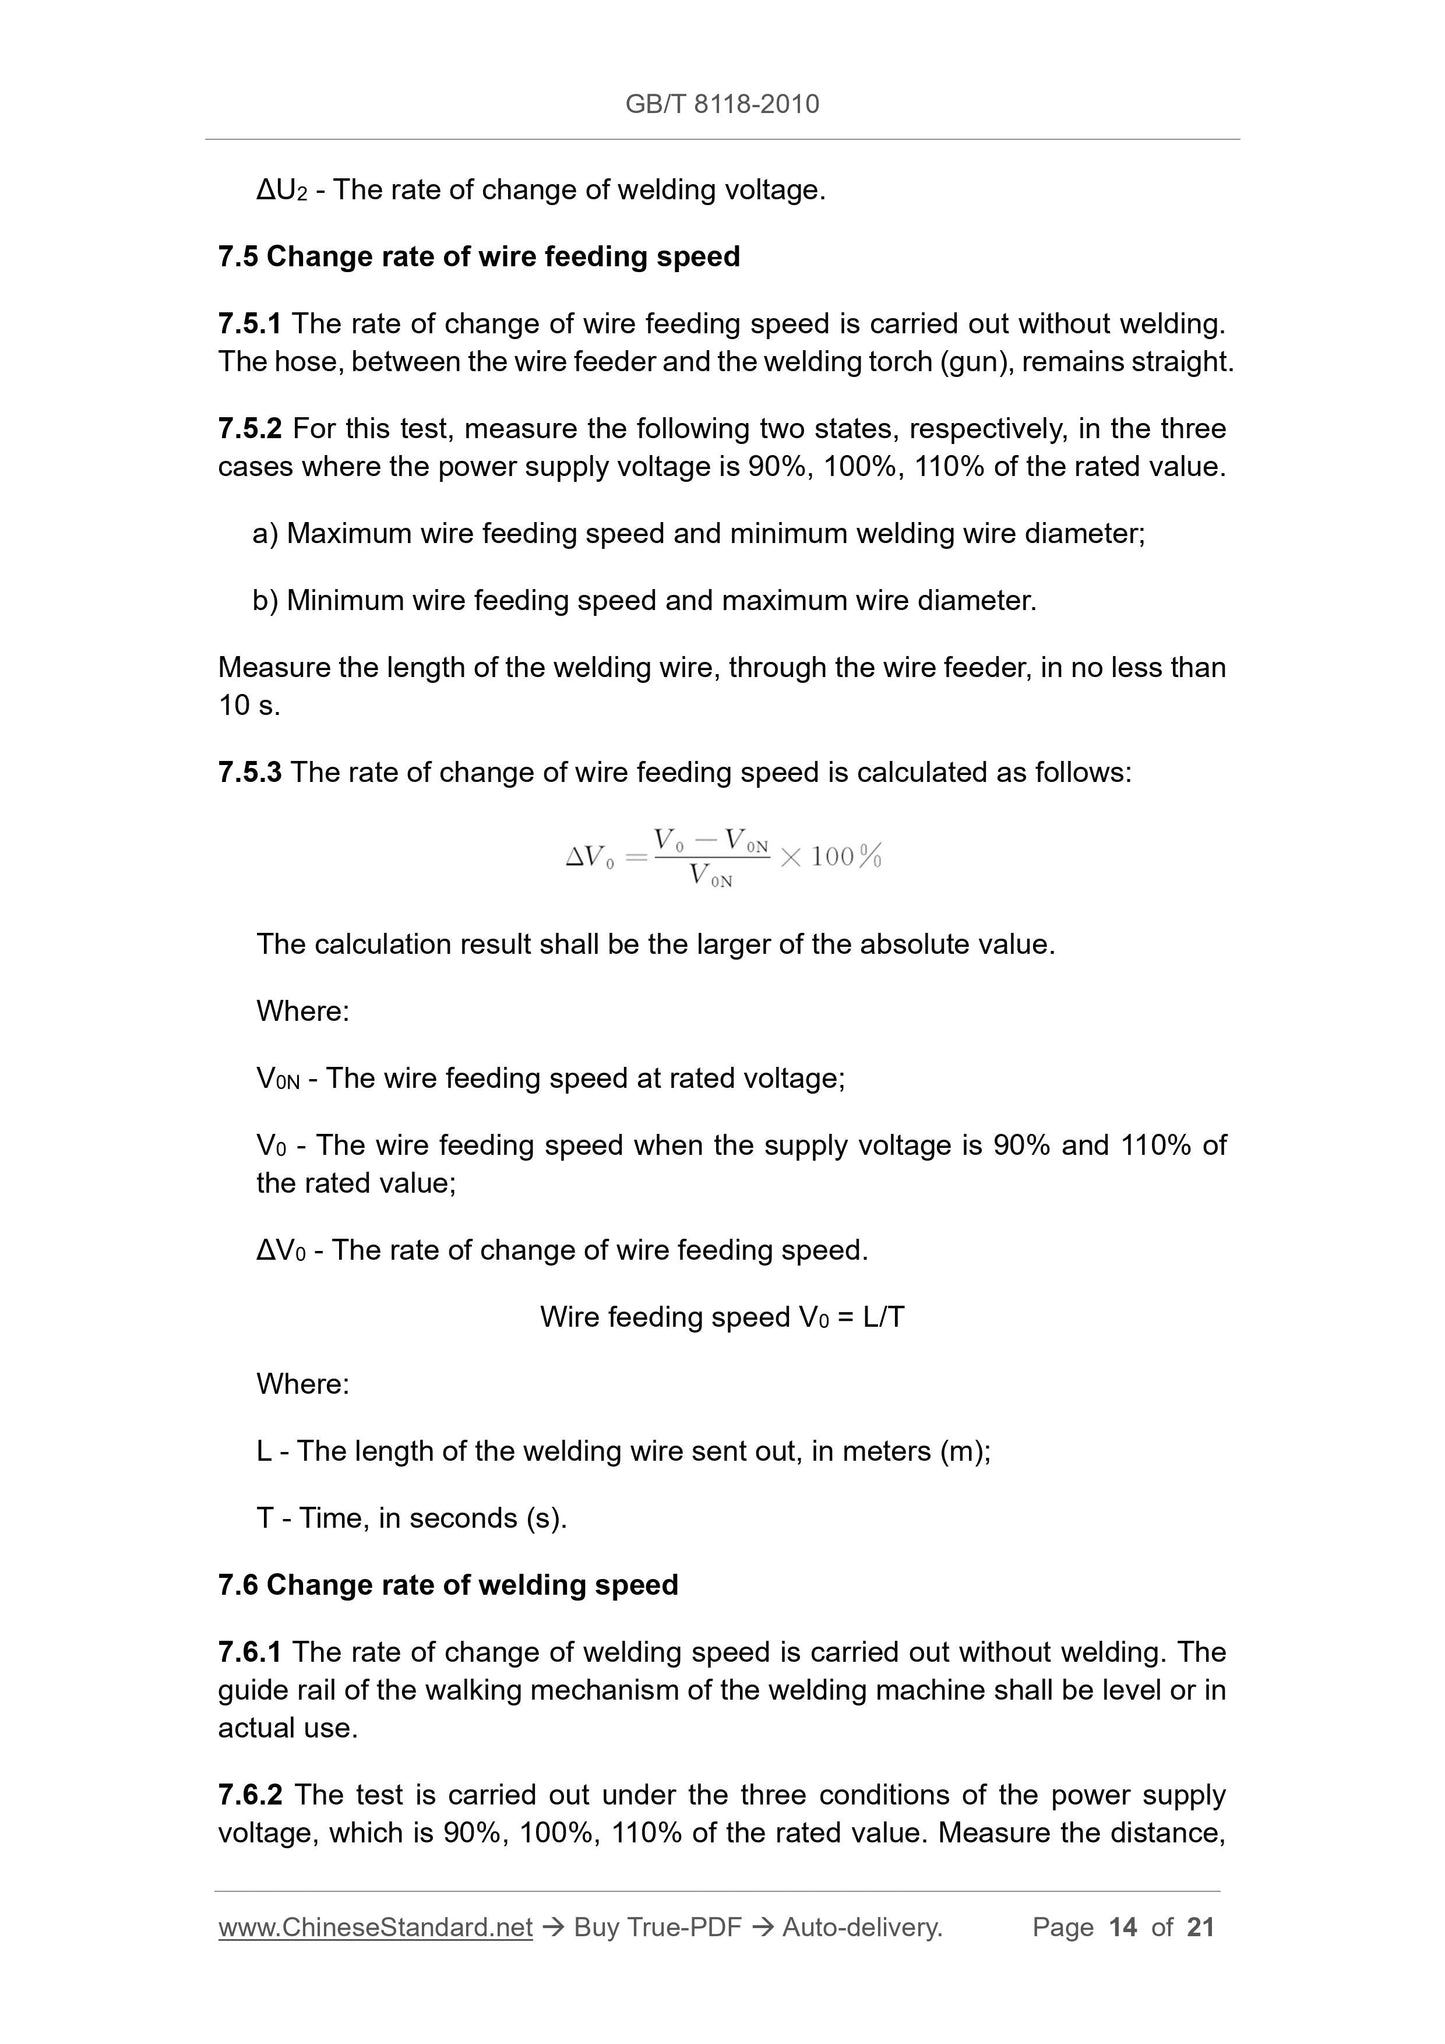 GB/T 8118-2010 Page 6